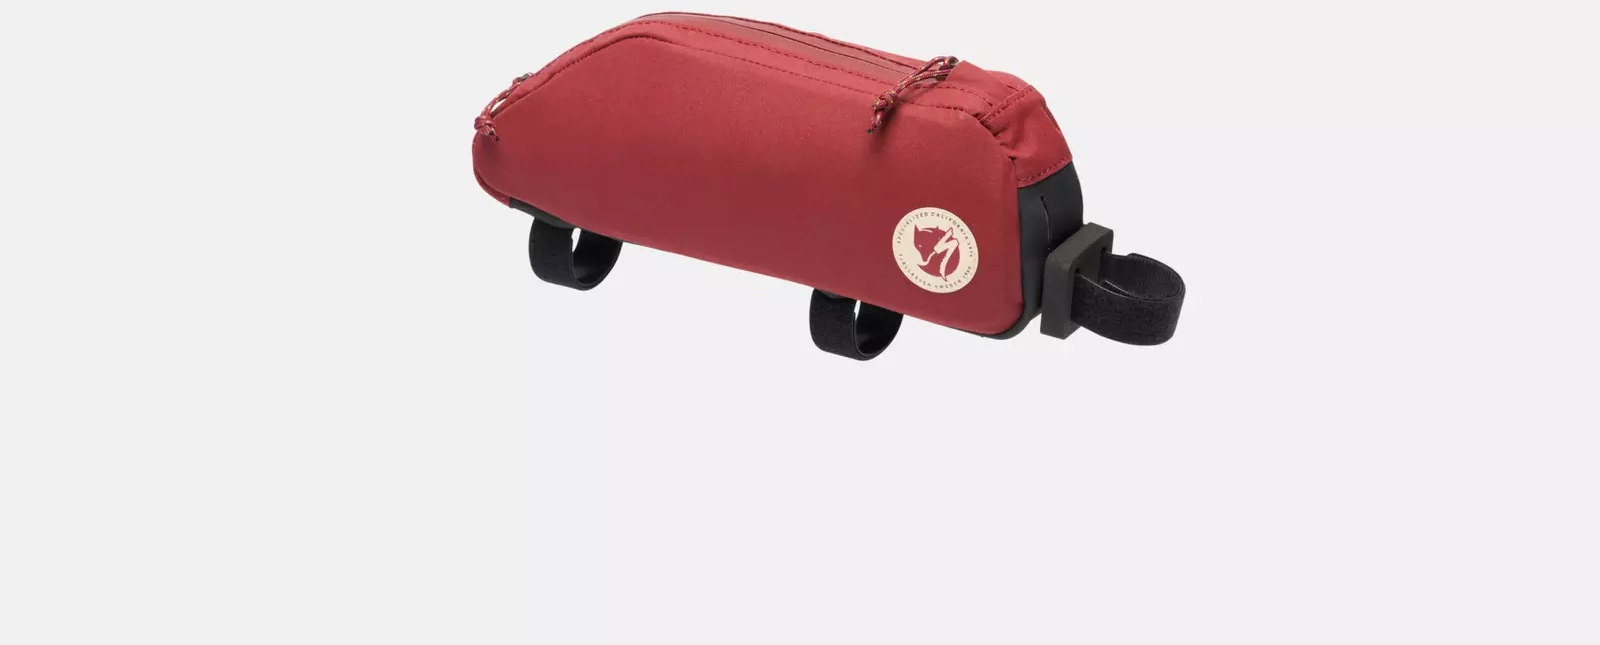 Specialized /Fjallraven Top Tube Bag One Size Ox Red